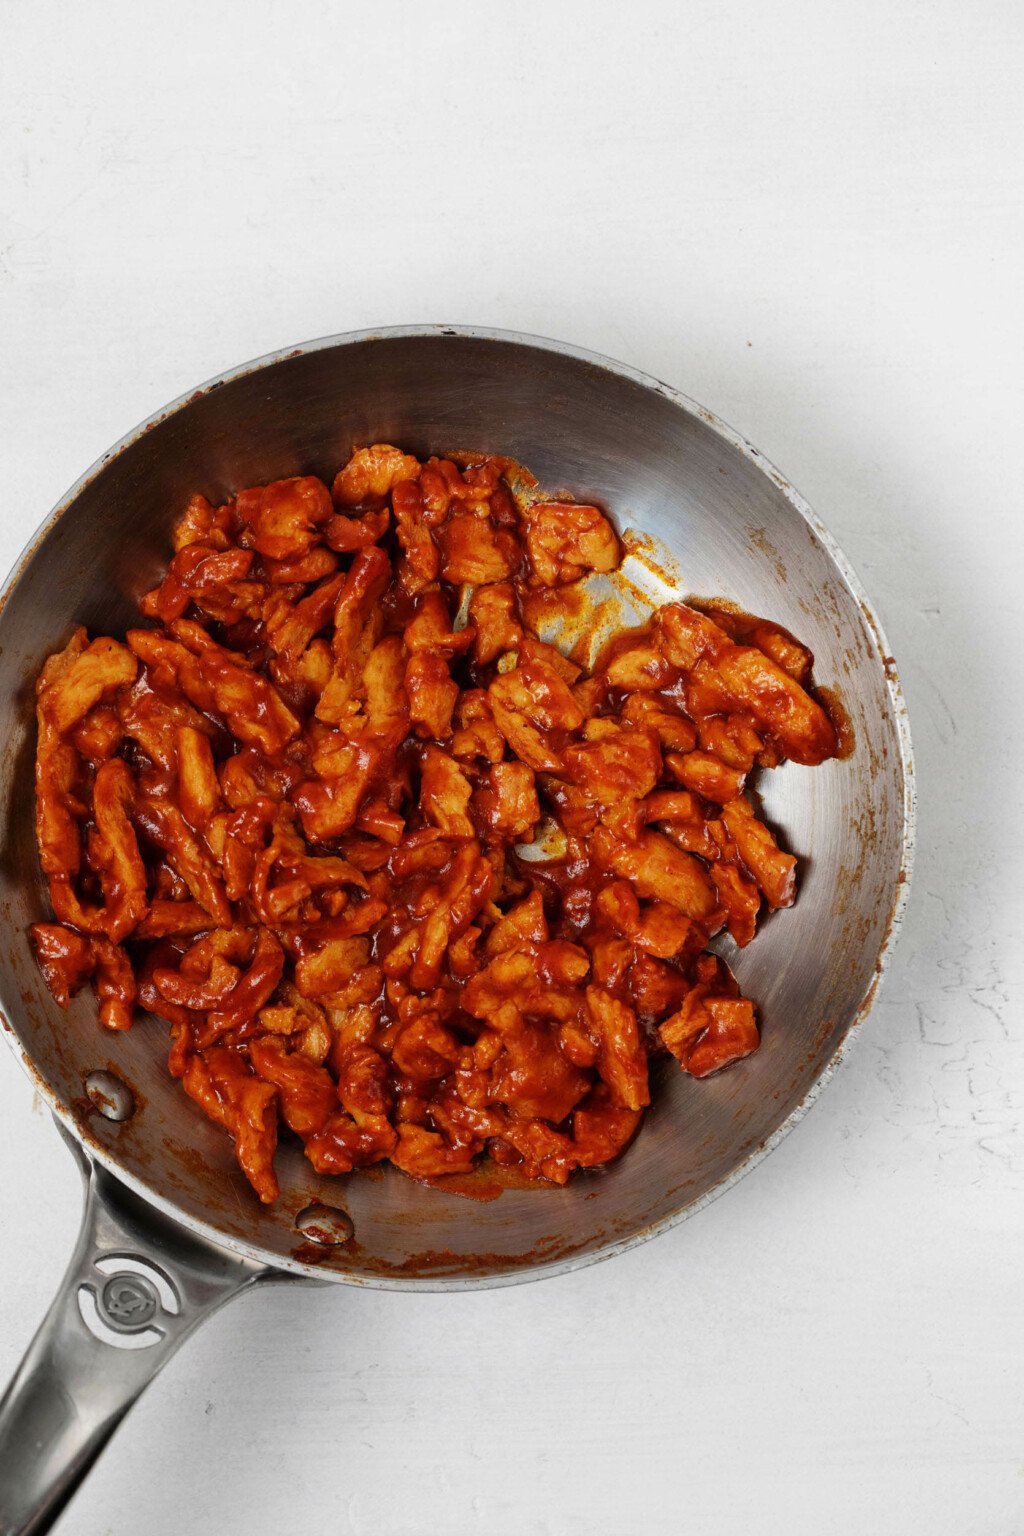 A frying pan has been filled with a vegan protein and a red, thick sauce.